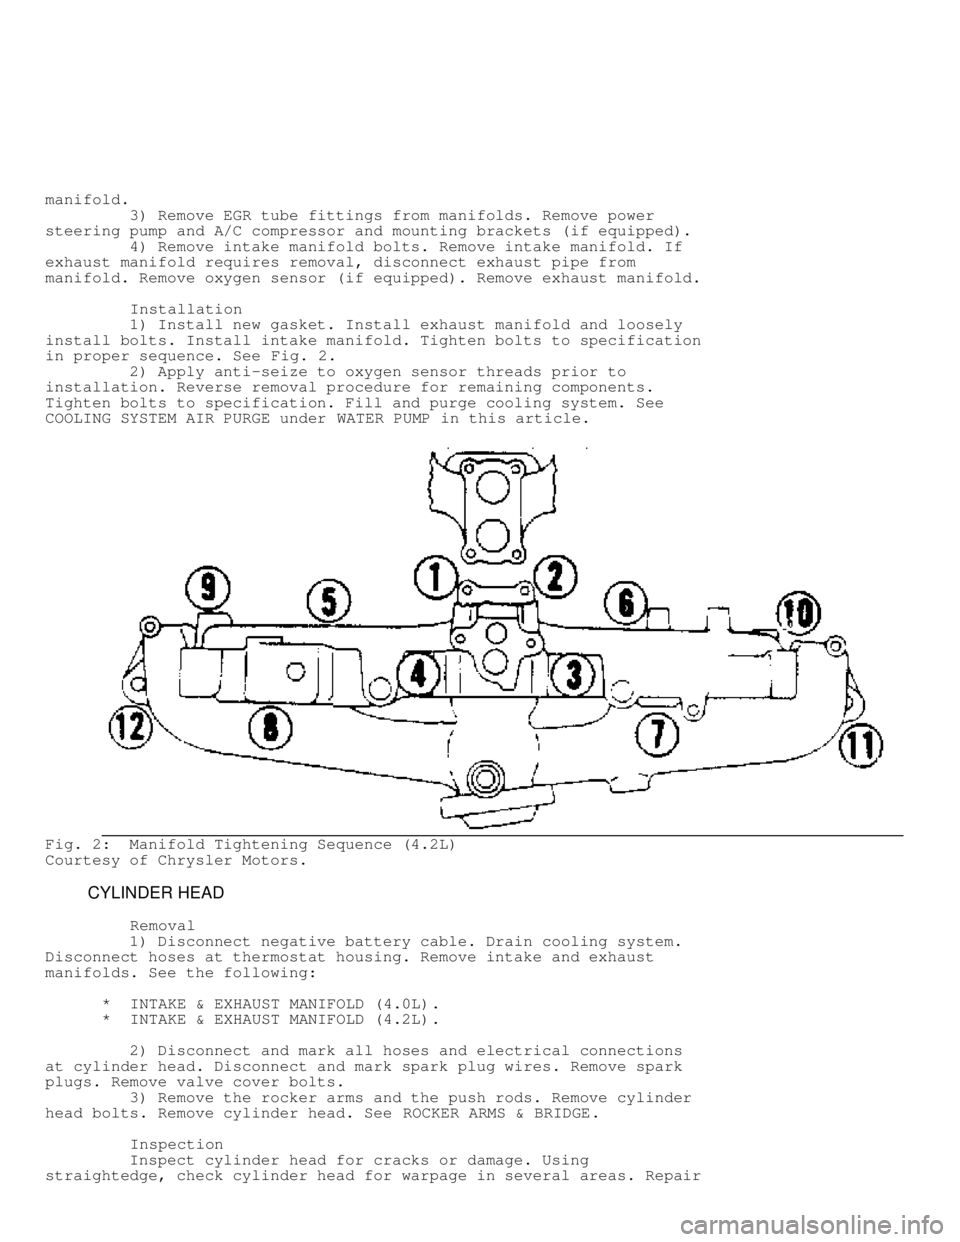 JEEP CHEROKEE 1988  Service Repair Manual manifold.
         3) Remove EGR tube fittings from manifolds. Remove power
steering pump and A/C compressor and mounting brackets (if equipped).
         4) Remove intake manifold bolts. Remove intak